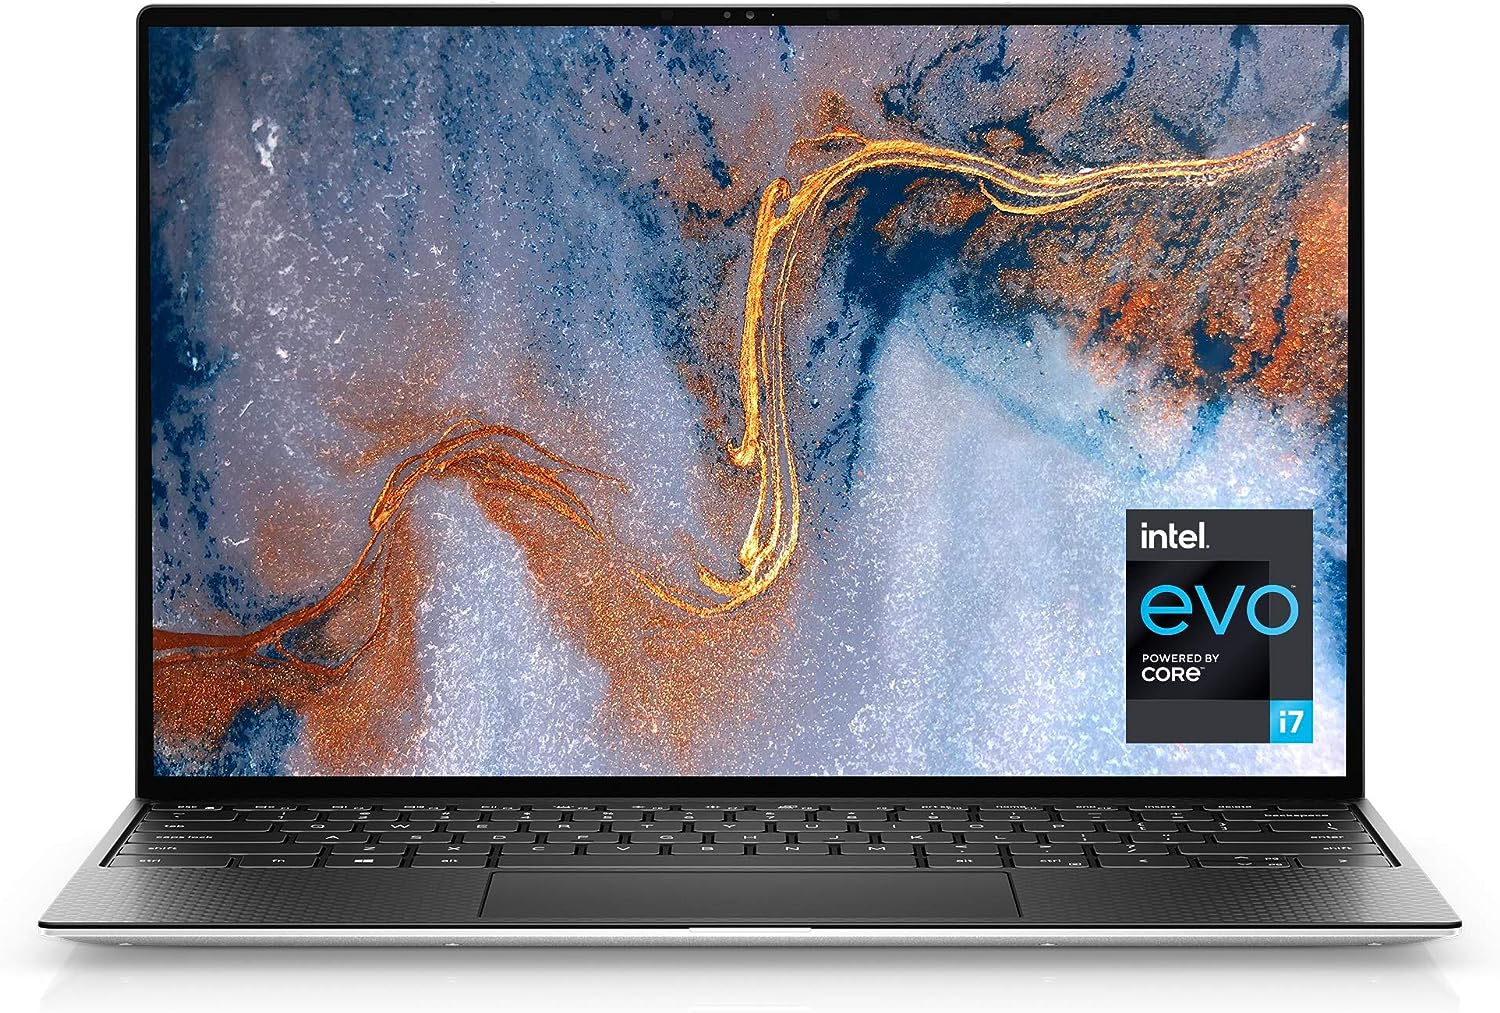 6.	Dell XPS 13 (9310), 13.4- inch FHD+ Touch Laptop